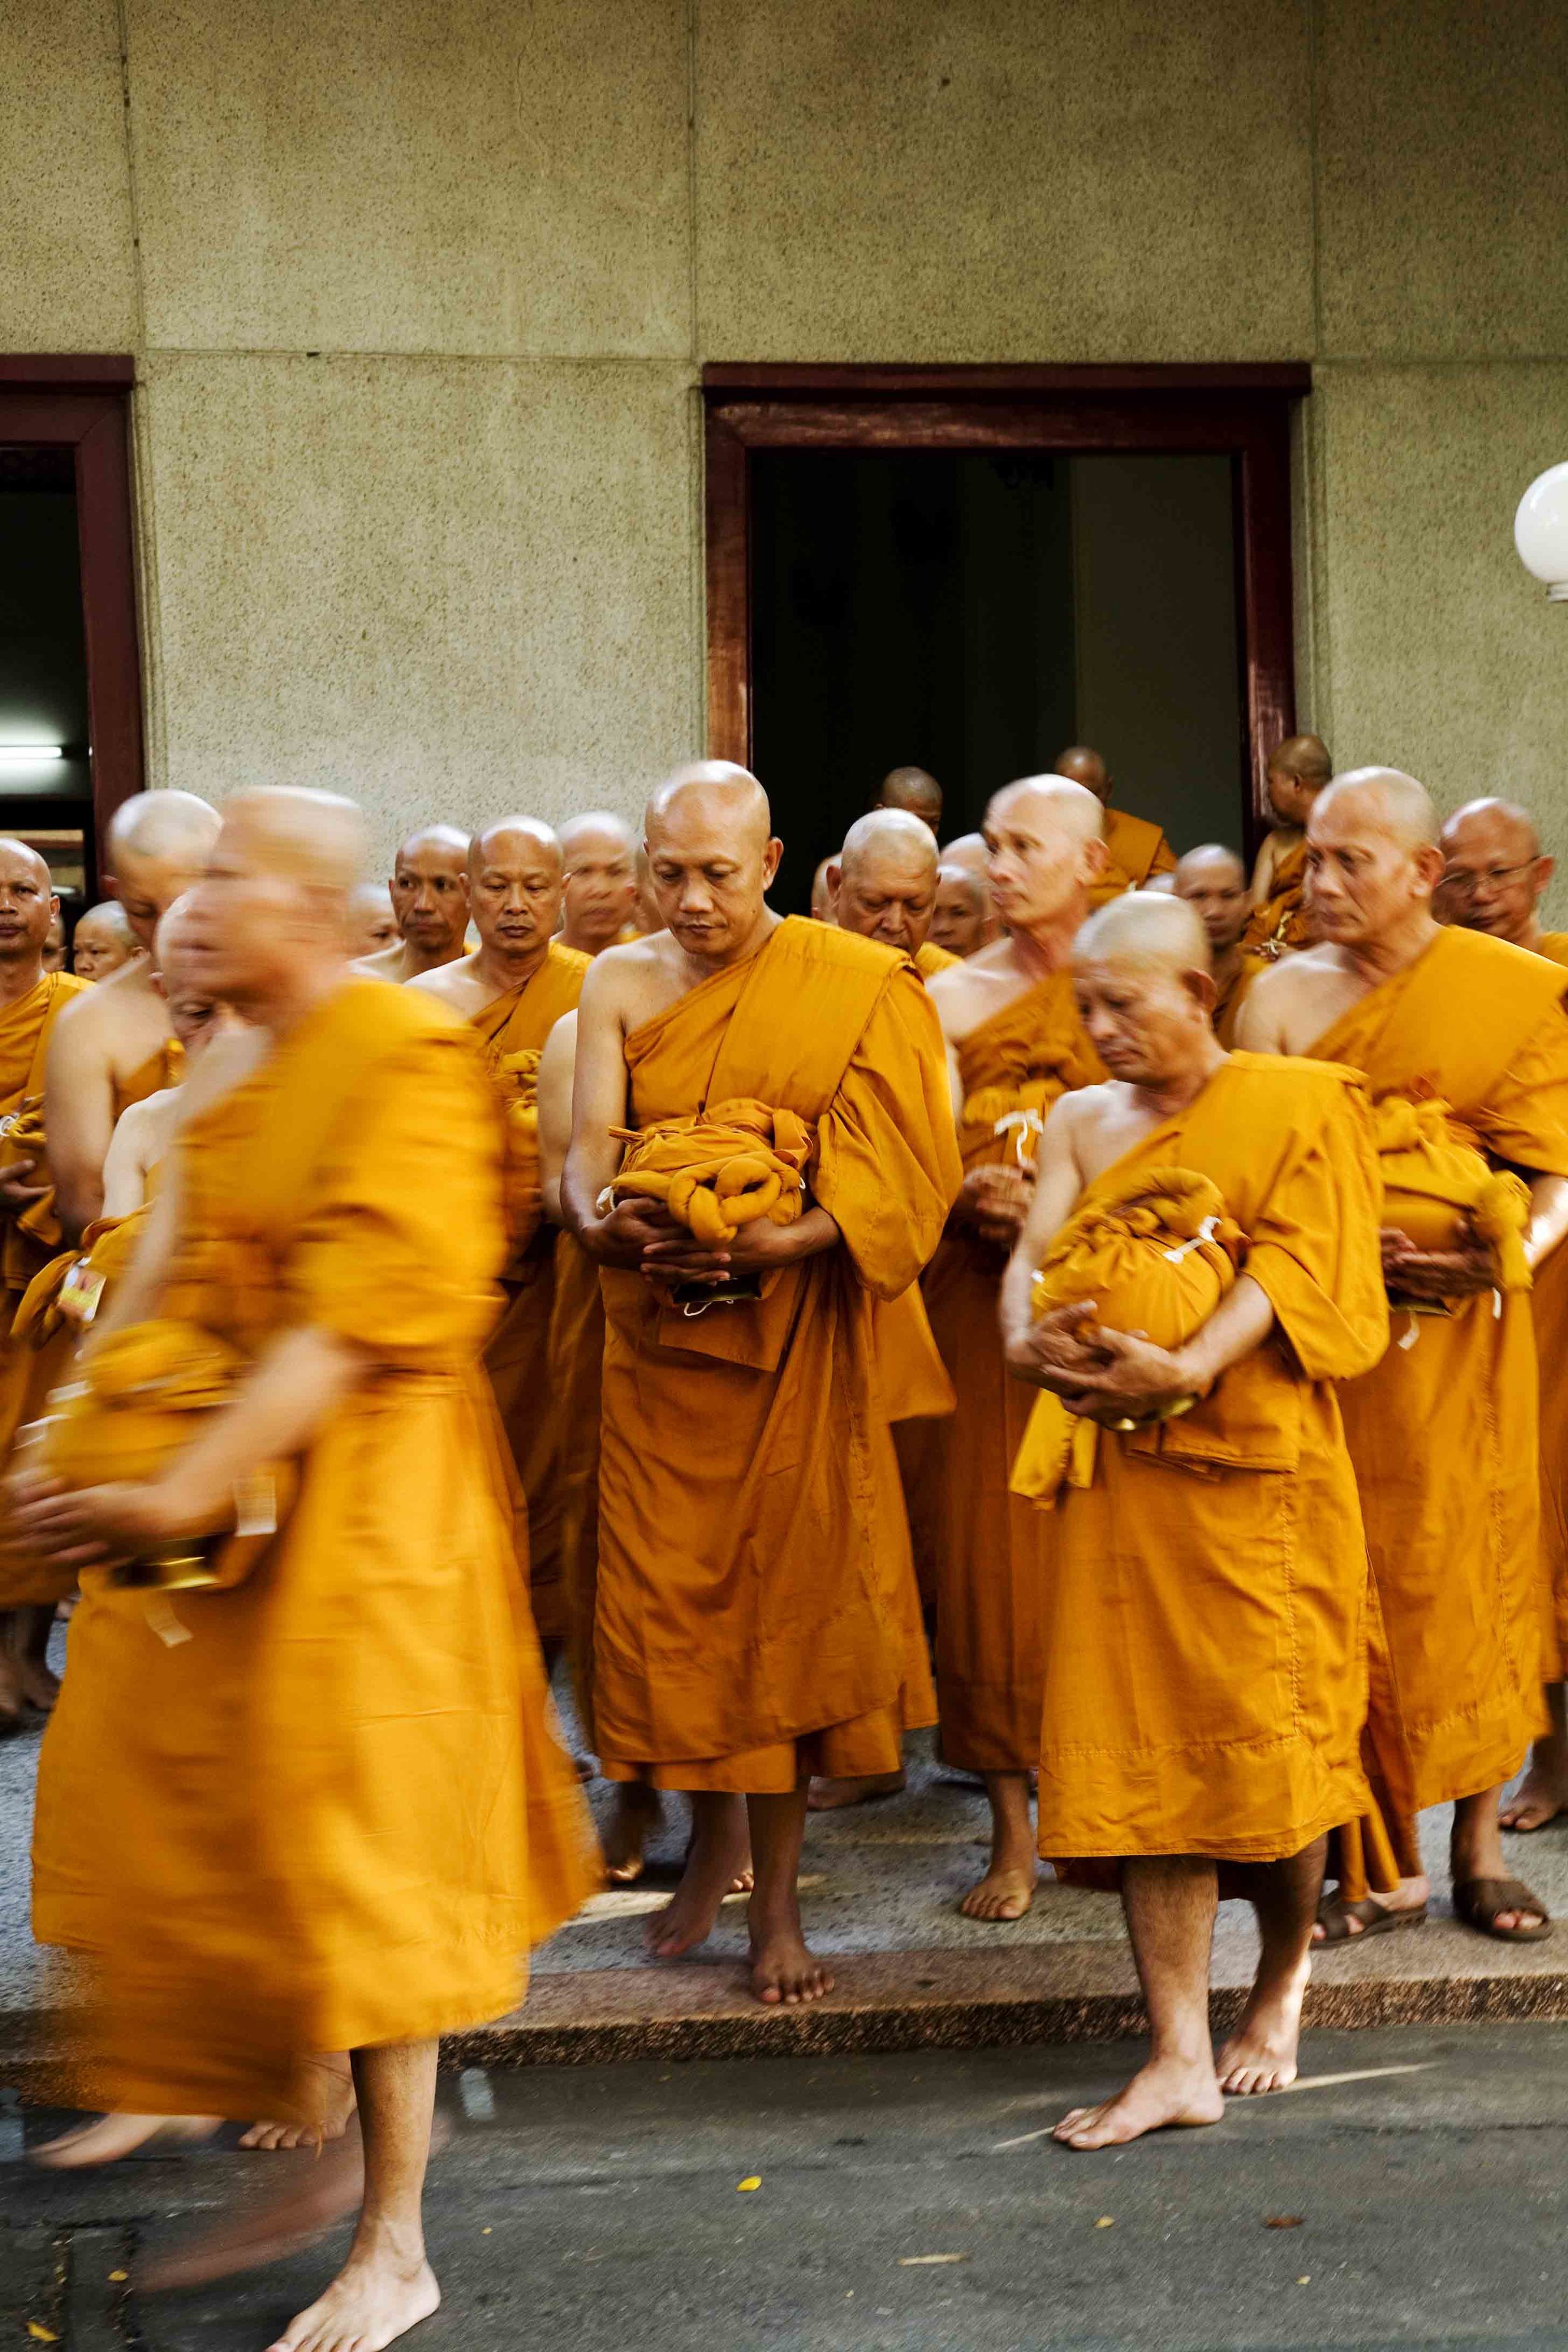 A-Lots of Monks 1A.jpg